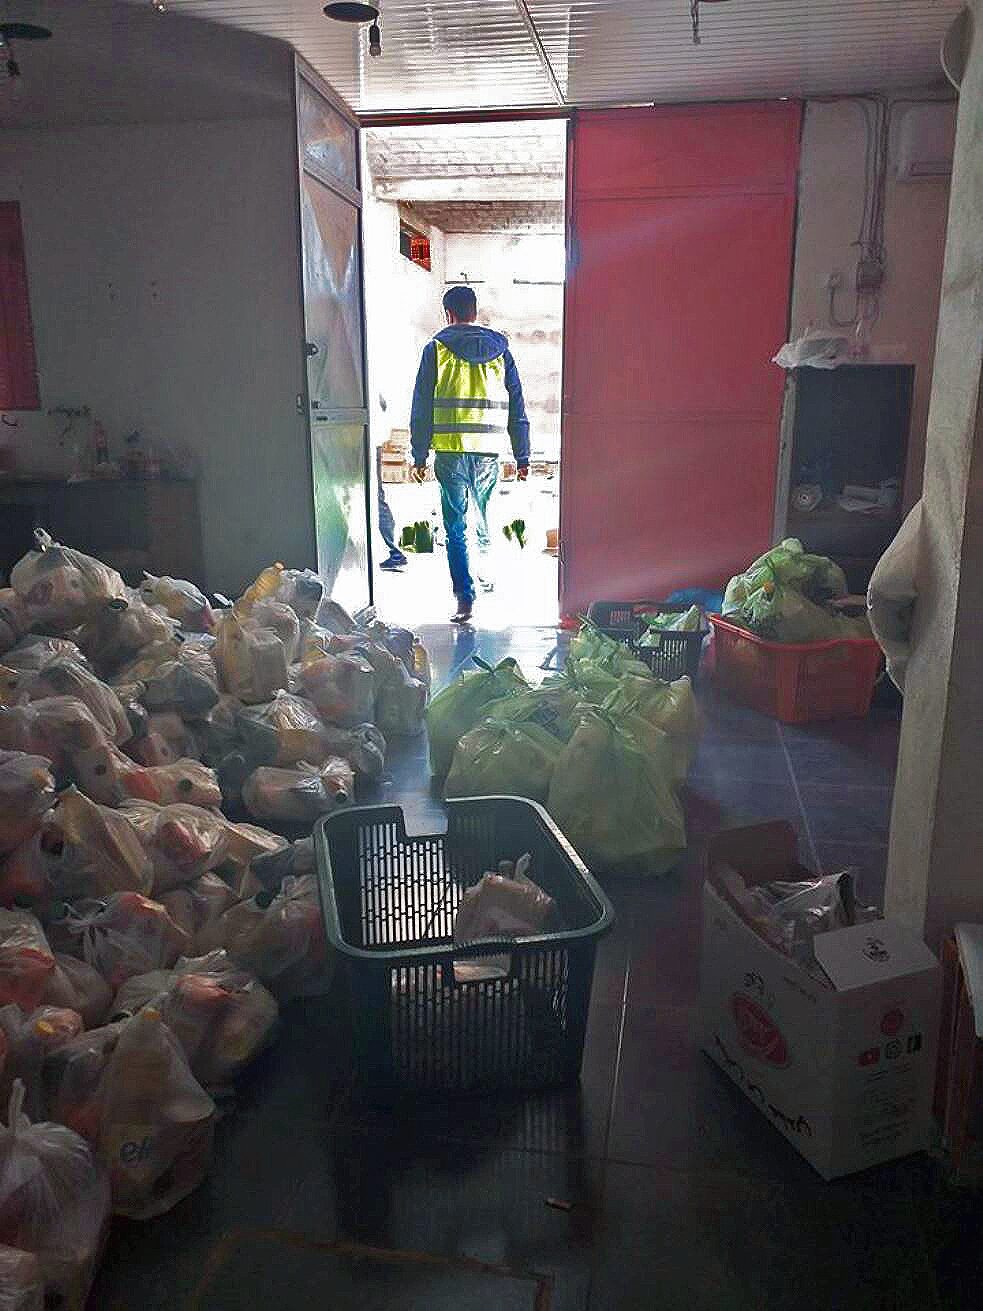 Image of a room filled with plastic bags of food and a man walking through the door.